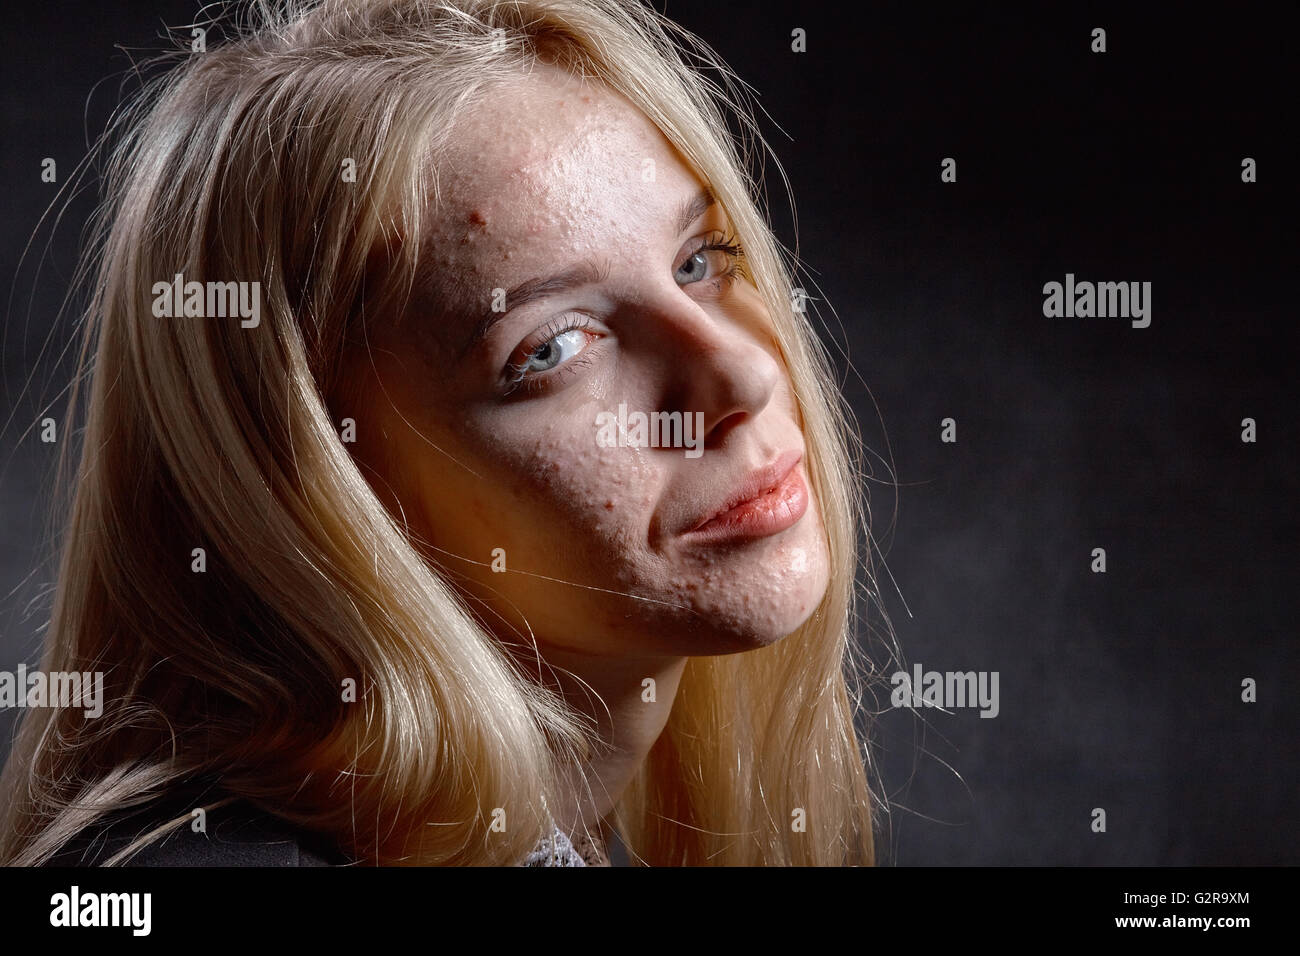 blond girl with pimply skin crying on black background Stock Photo